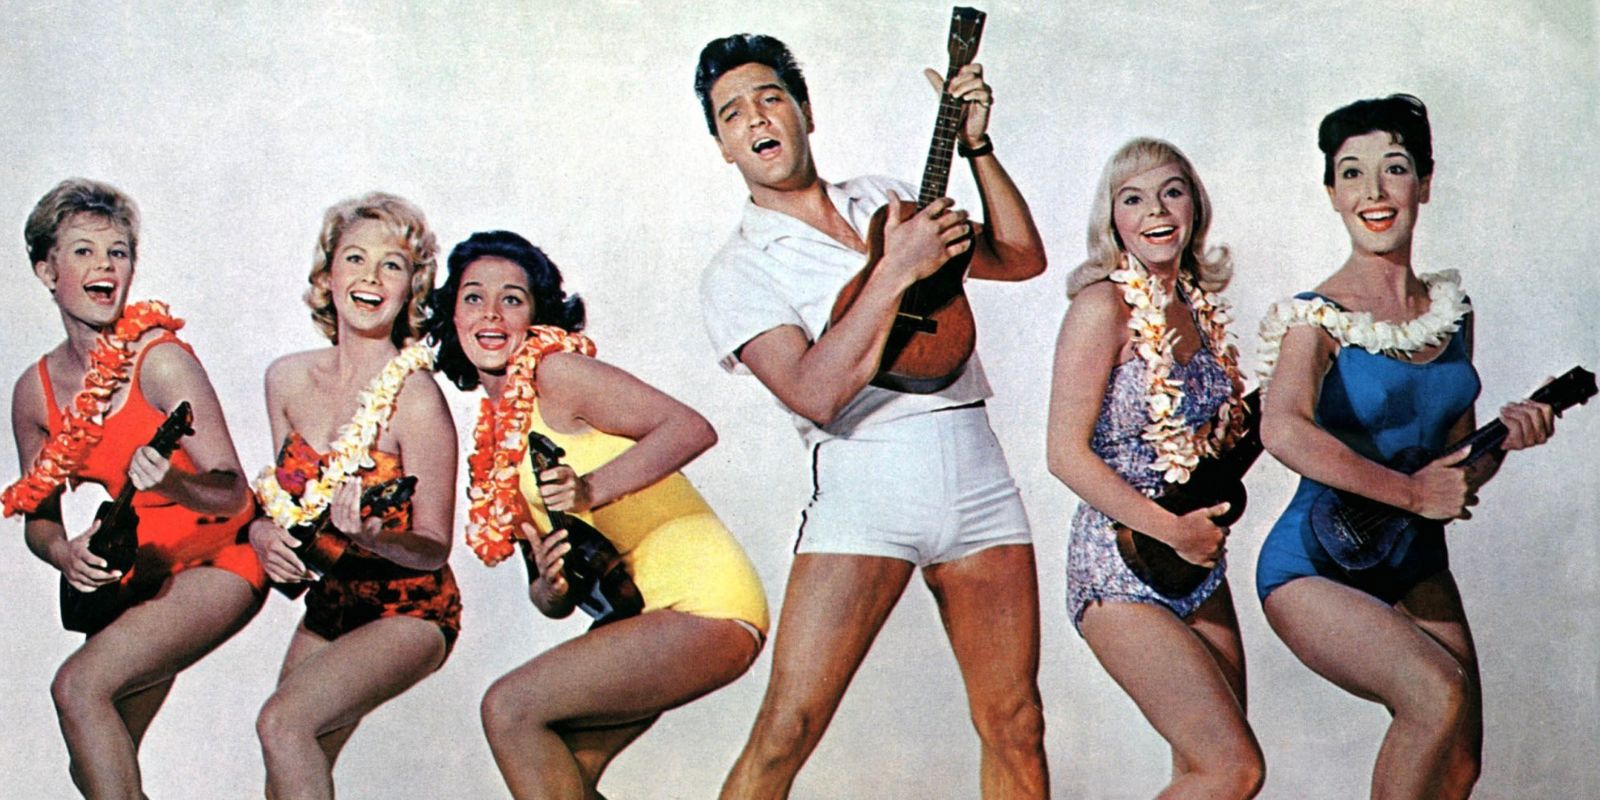 Elvis plus five women in bathing suits and leis all with ukeleles in a promo shot for Blue Hawaii